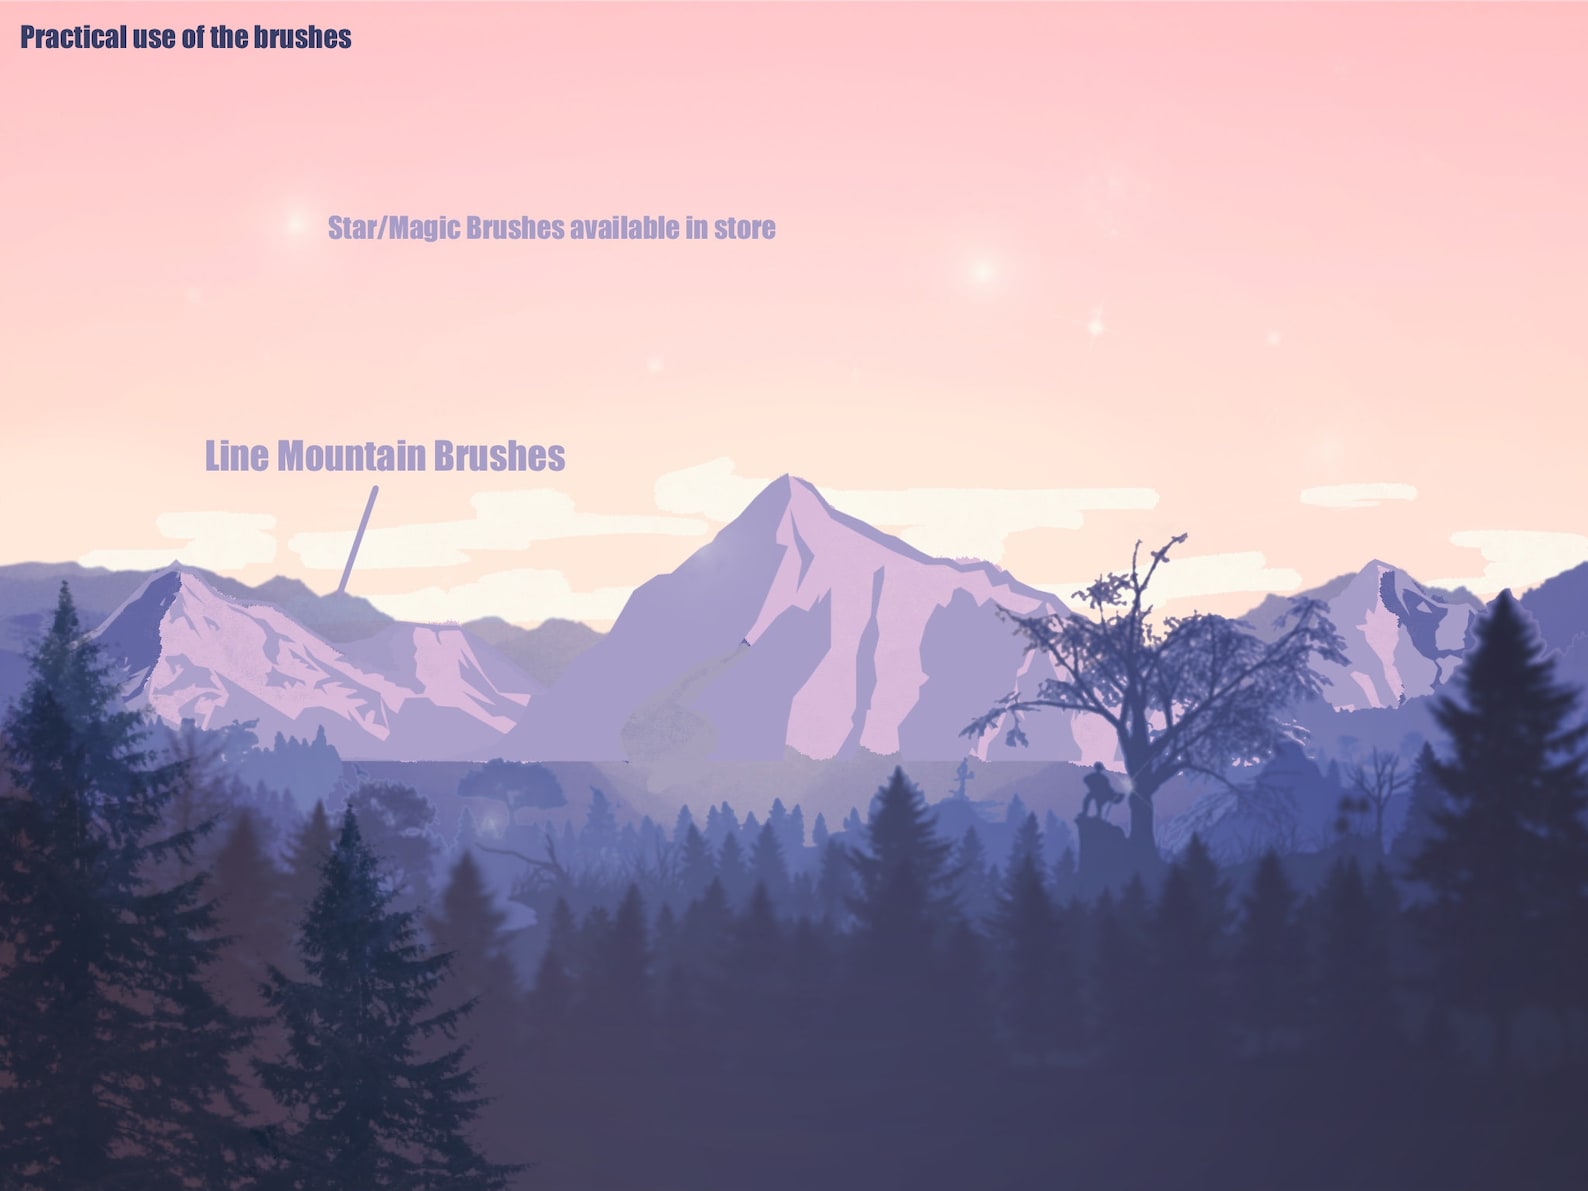 free mountain brushes for procreate